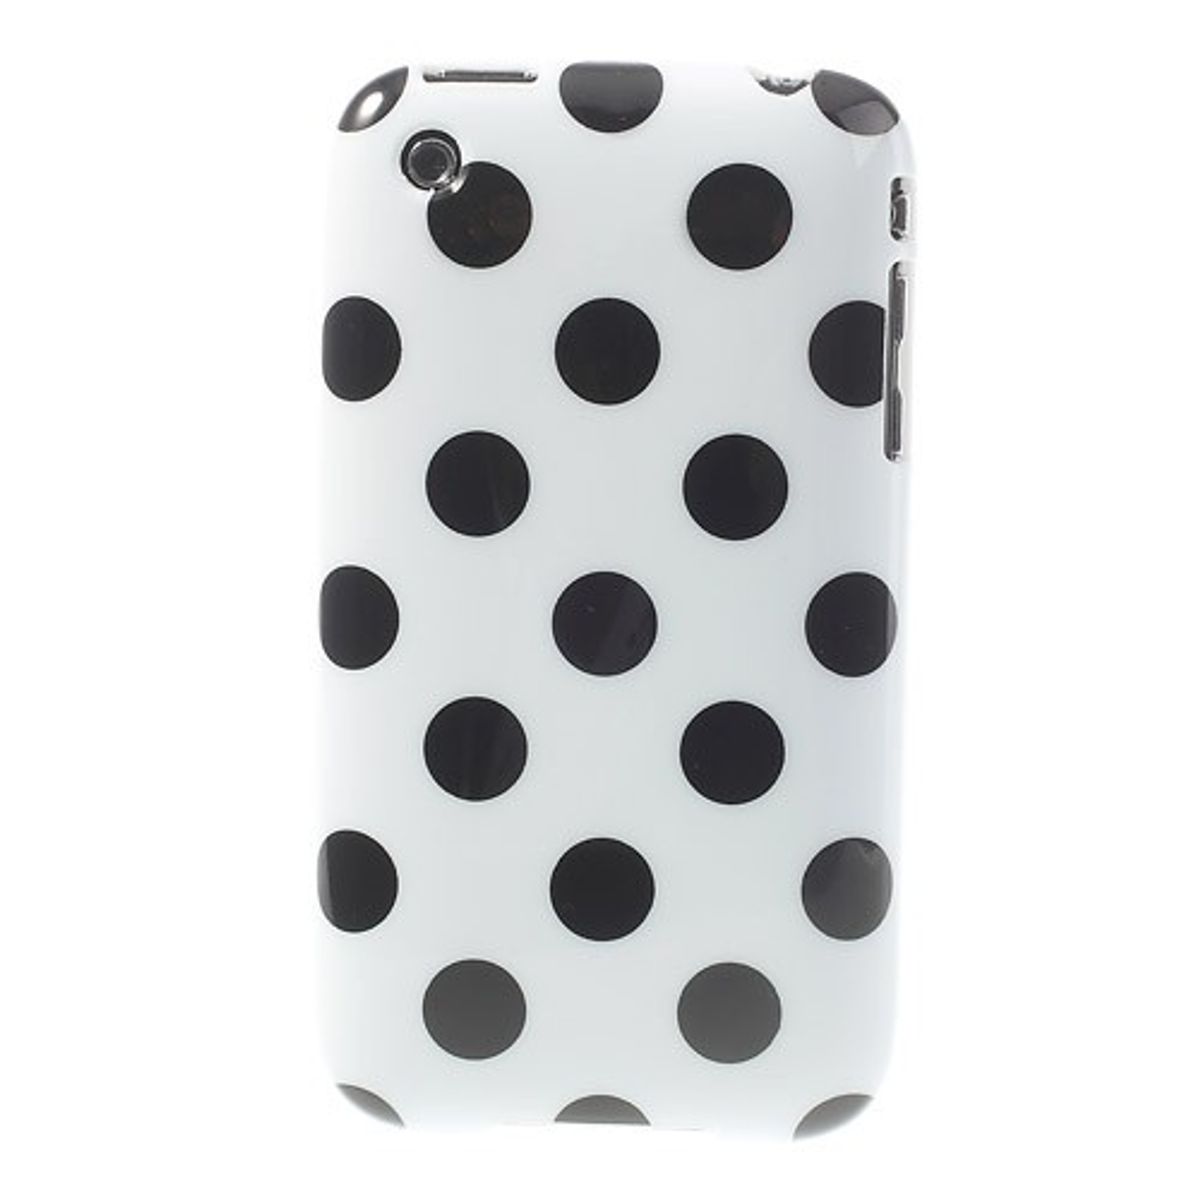 Protective case for mobile phone Apple iPhone 3 3G 3GS white/black